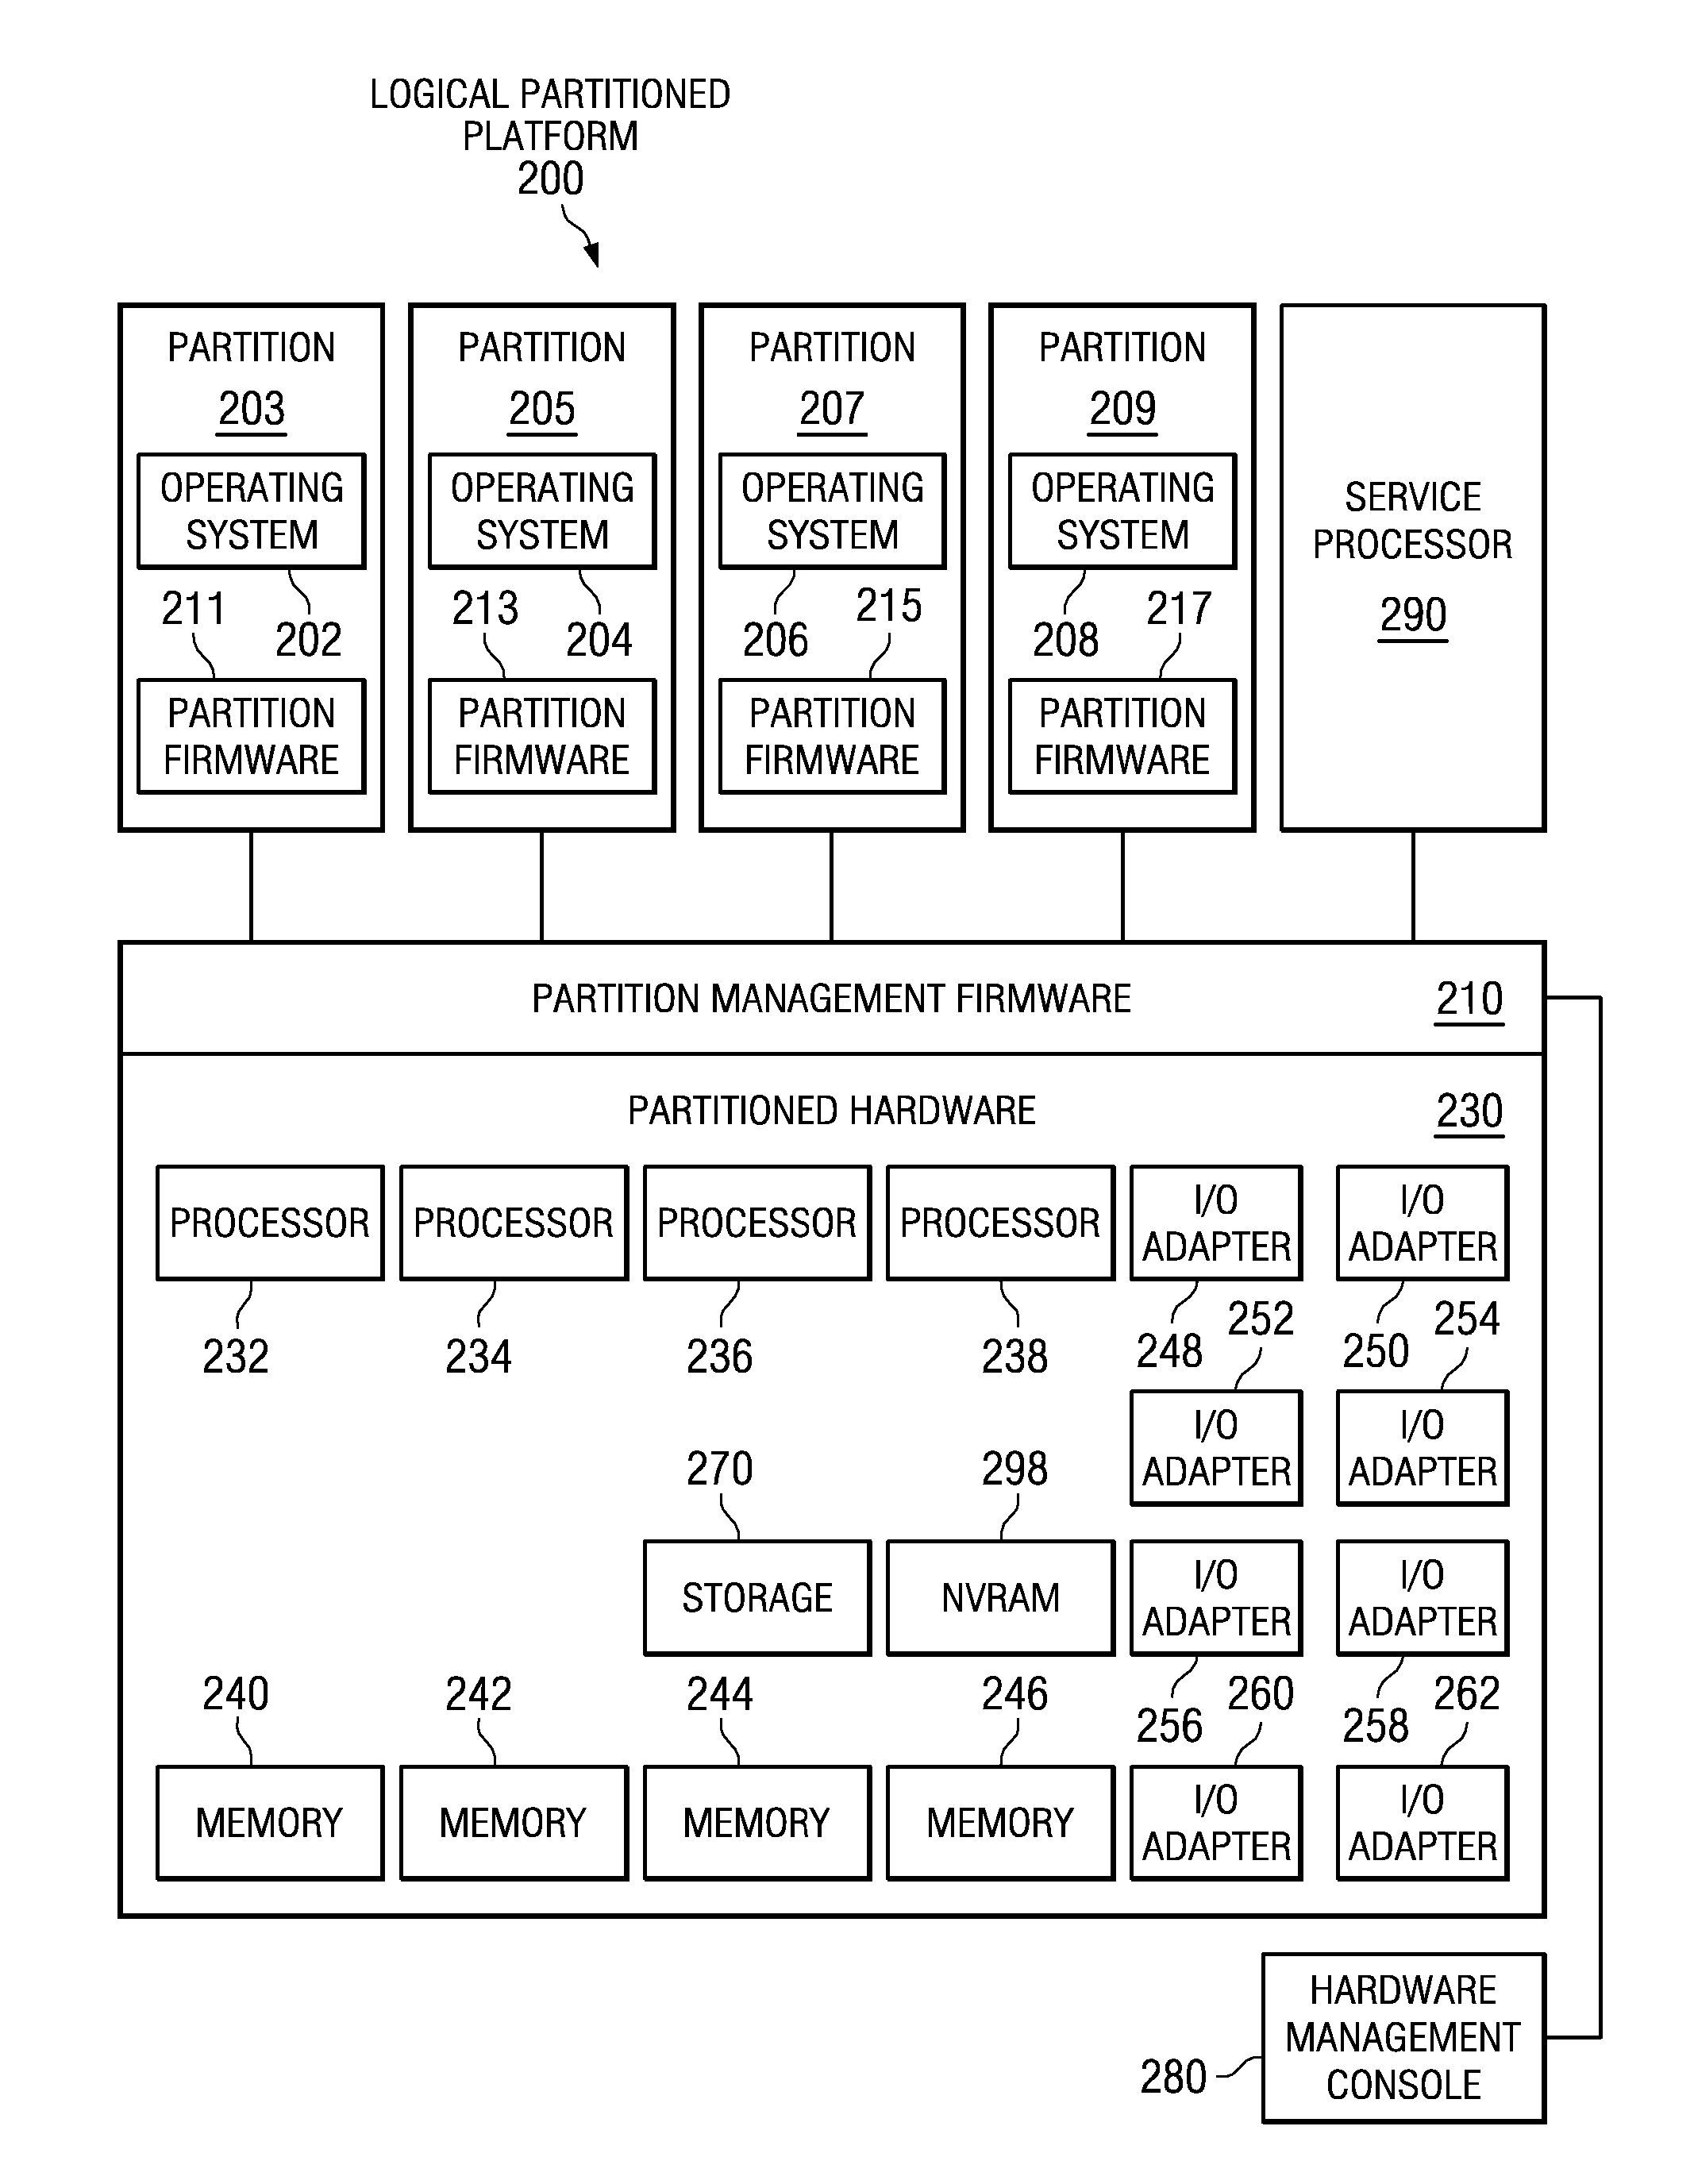 Nsmart scheduling of automatic partition migration by the user of timers